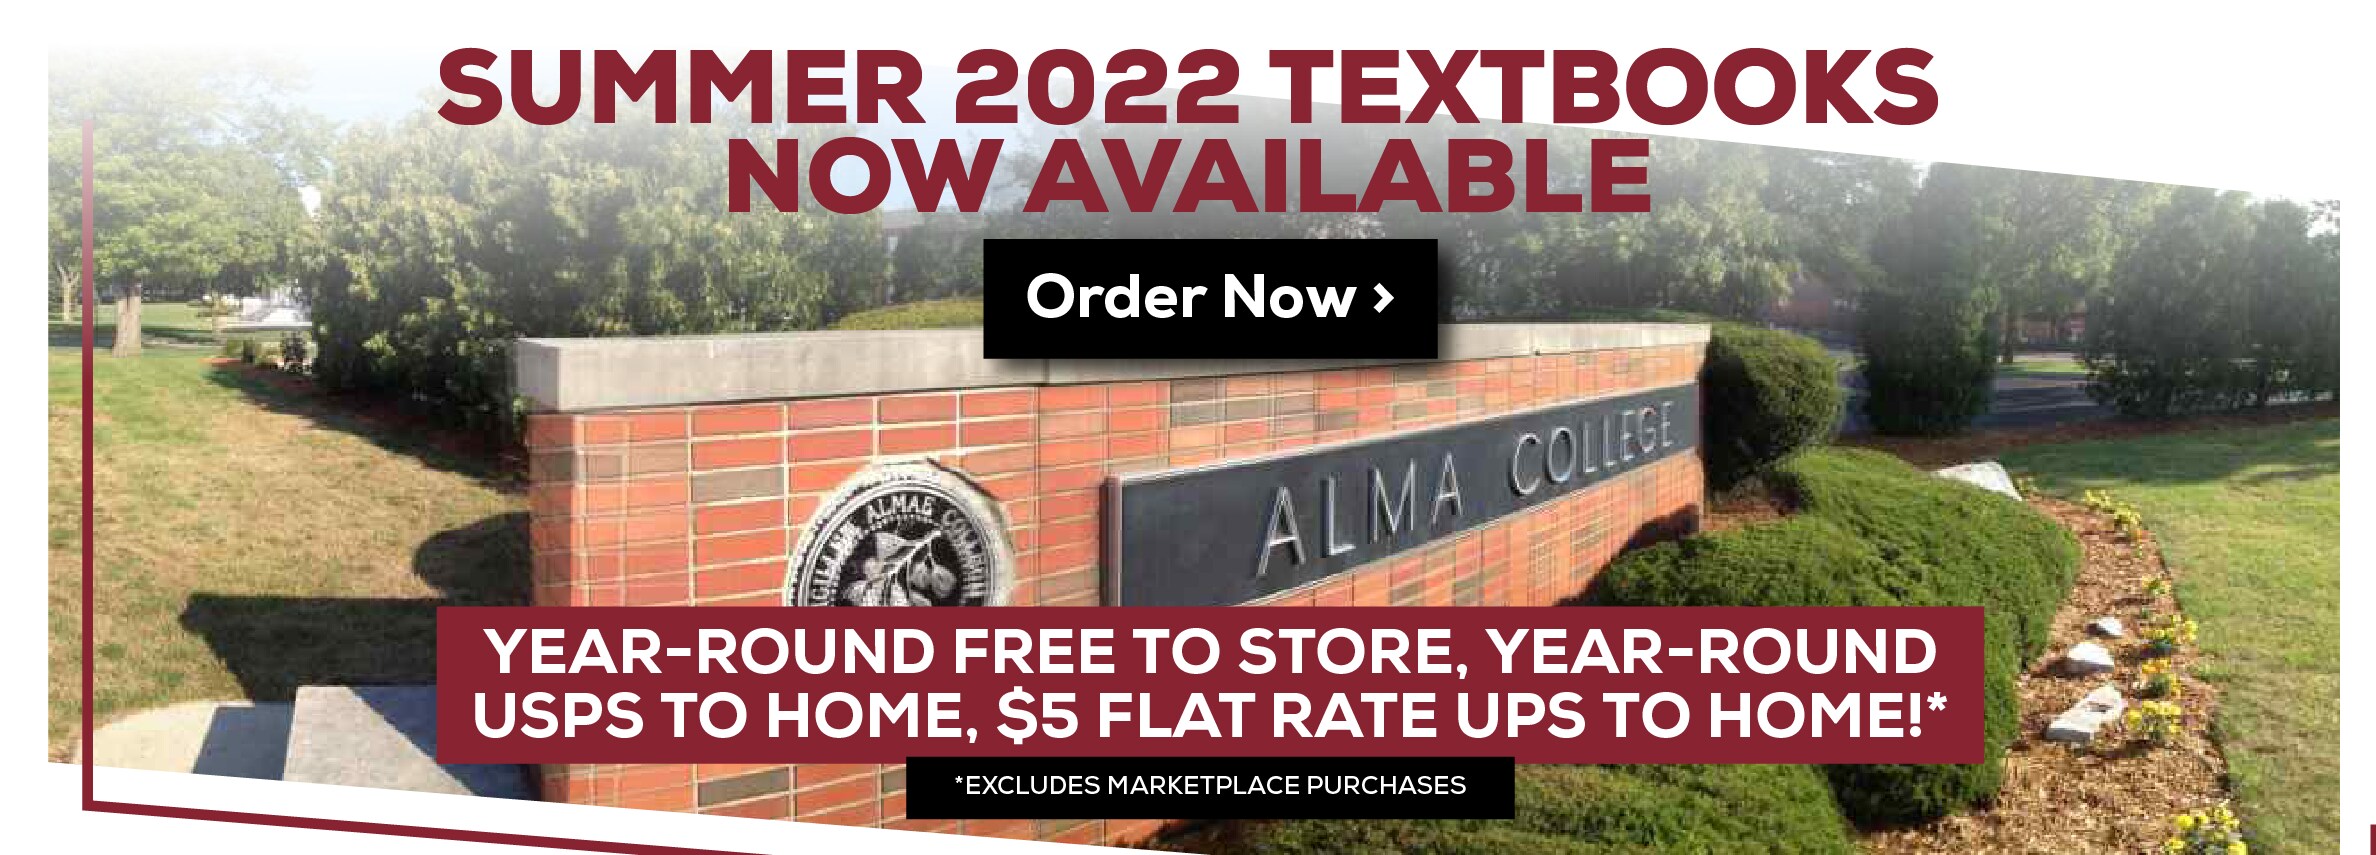 Summer 2022 Textbooks Now Available Order Now - Year-Round free to store, Year-Round USPS to home, $5 flat rate UPS to home